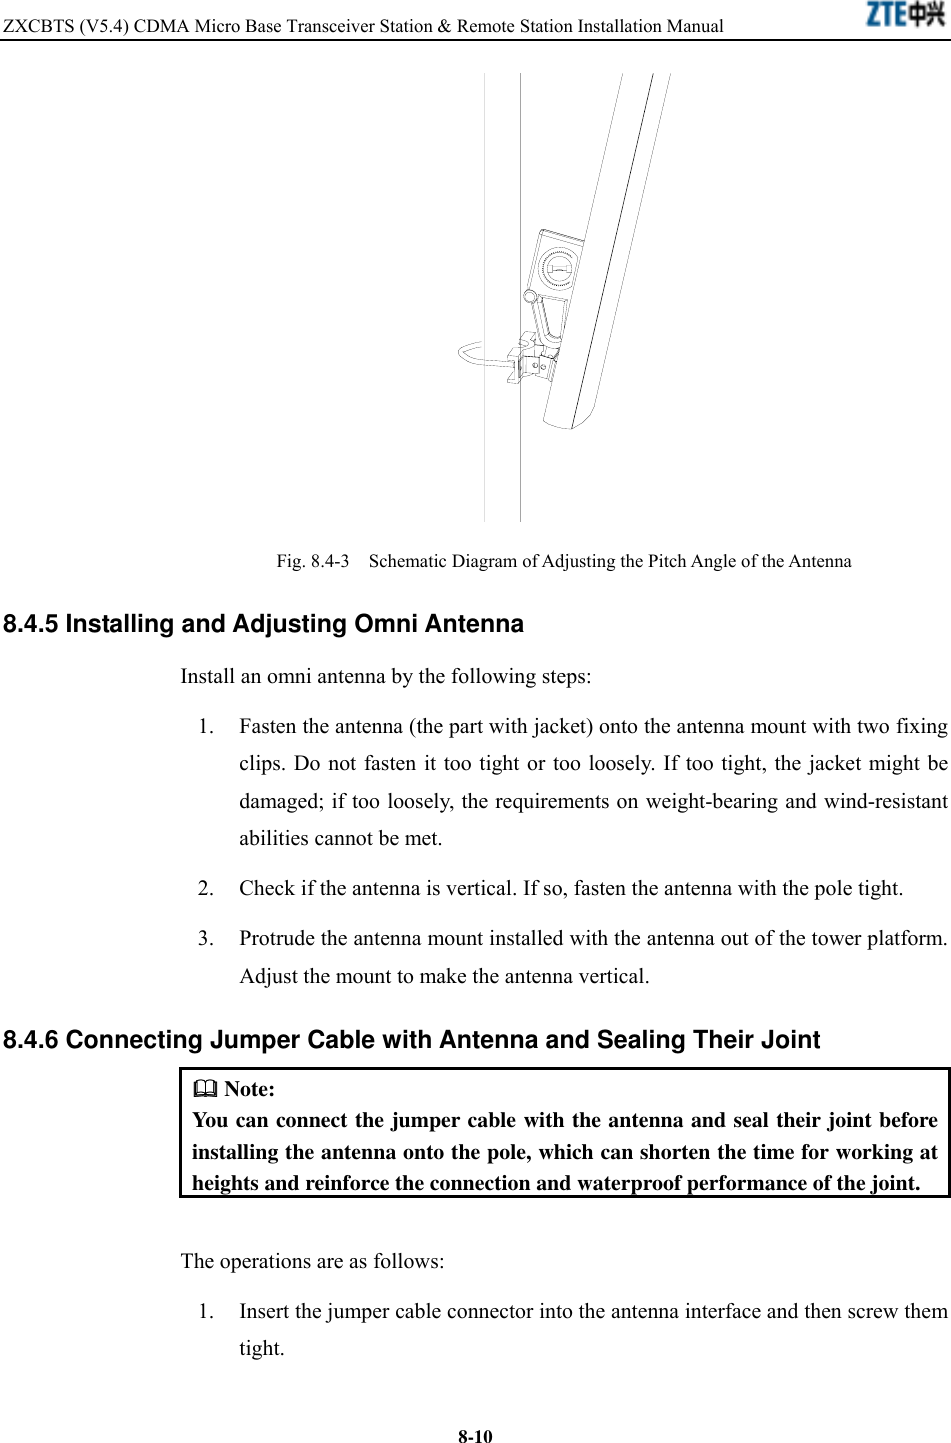 ZXCBTS (V5.4) CDMA Micro Base Transceiver Station &amp; Remote Station Installation Manual    8-10 Fig. 8.4-3    Schematic Diagram of Adjusting the Pitch Angle of the Antenna 8.4.5 Installing and Adjusting Omni Antenna Install an omni antenna by the following steps: 1.  Fasten the antenna (the part with jacket) onto the antenna mount with two fixing clips. Do not fasten it too tight or too loosely. If too tight, the jacket might be damaged; if too loosely, the requirements on weight-bearing and wind-resistant abilities cannot be met. 2.  Check if the antenna is vertical. If so, fasten the antenna with the pole tight. 3.  Protrude the antenna mount installed with the antenna out of the tower platform. Adjust the mount to make the antenna vertical. 8.4.6 Connecting Jumper Cable with Antenna and Sealing Their Joint  Note: You can connect the jumper cable with the antenna and seal their joint before installing the antenna onto the pole, which can shorten the time for working at heights and reinforce the connection and waterproof performance of the joint. The operations are as follows: 1.  Insert the jumper cable connector into the antenna interface and then screw them tight. 